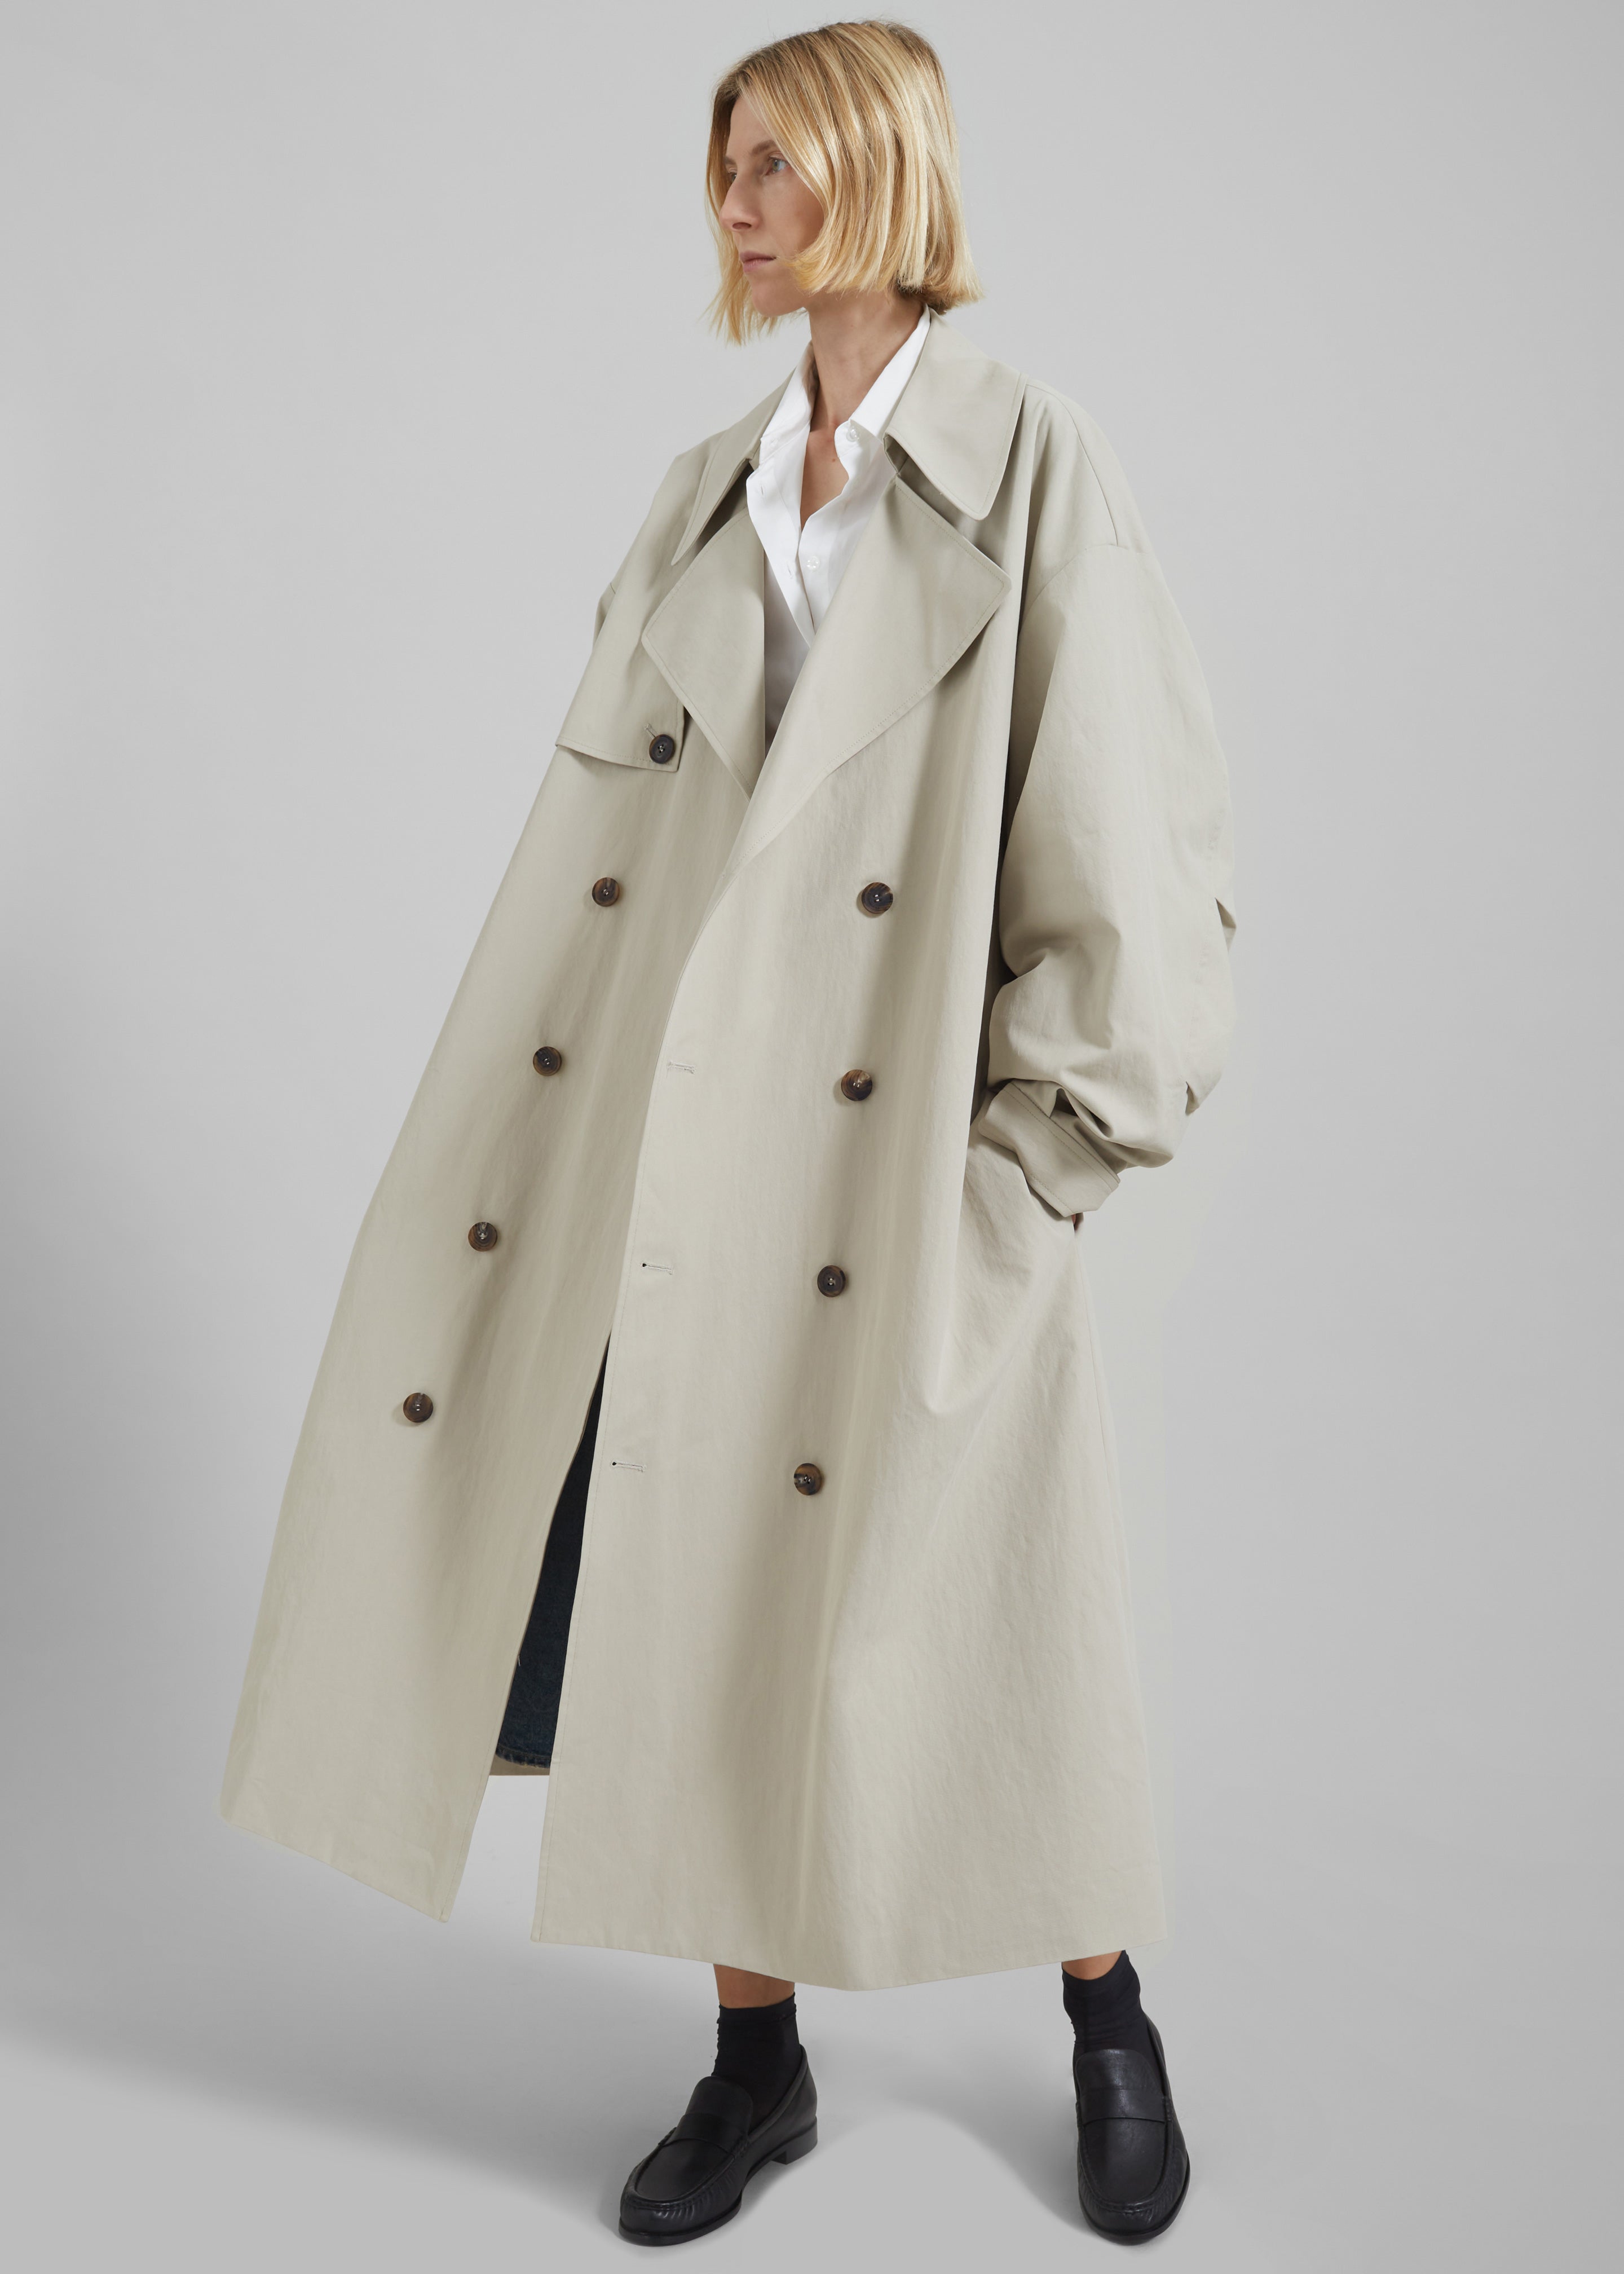 Anika Double Breasted Trench Coat - Beige - 4